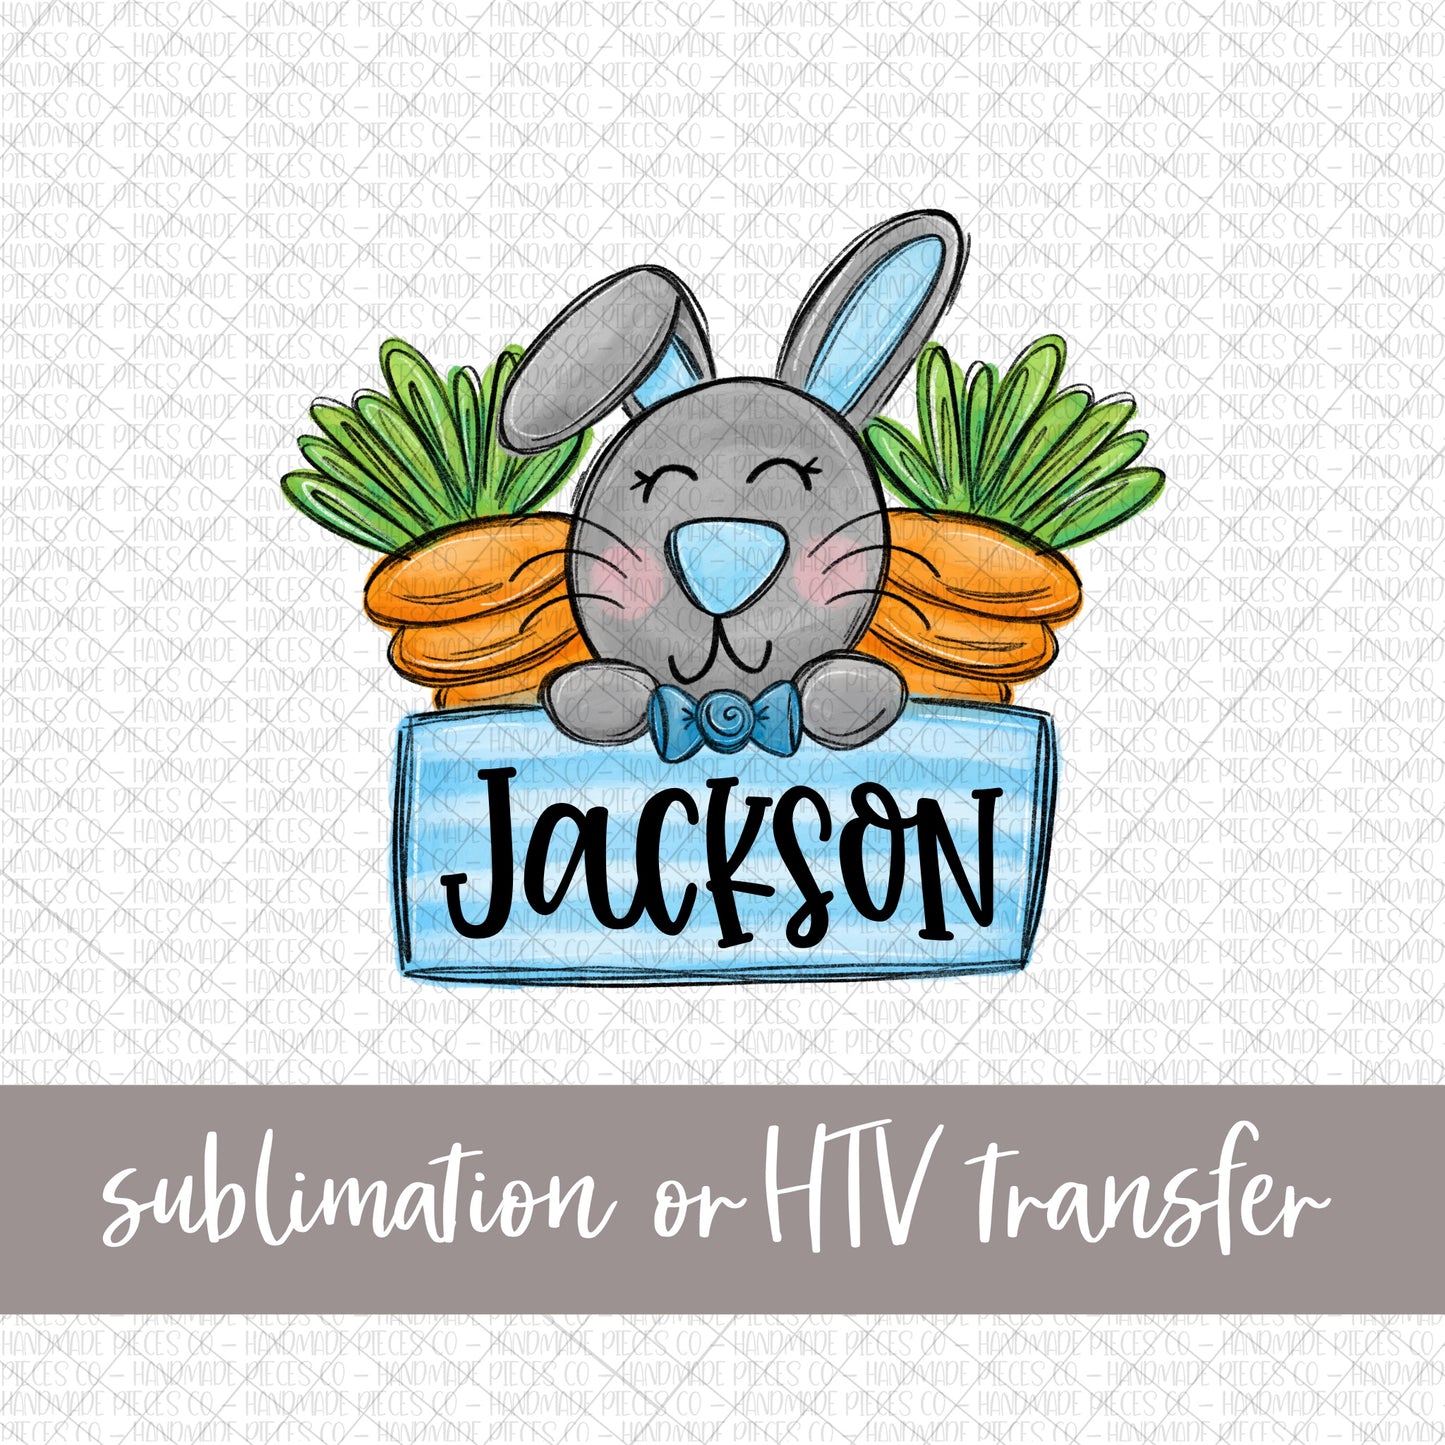 Bunny with Carrots, Blue with Name - Sublimation or HTV Transfer